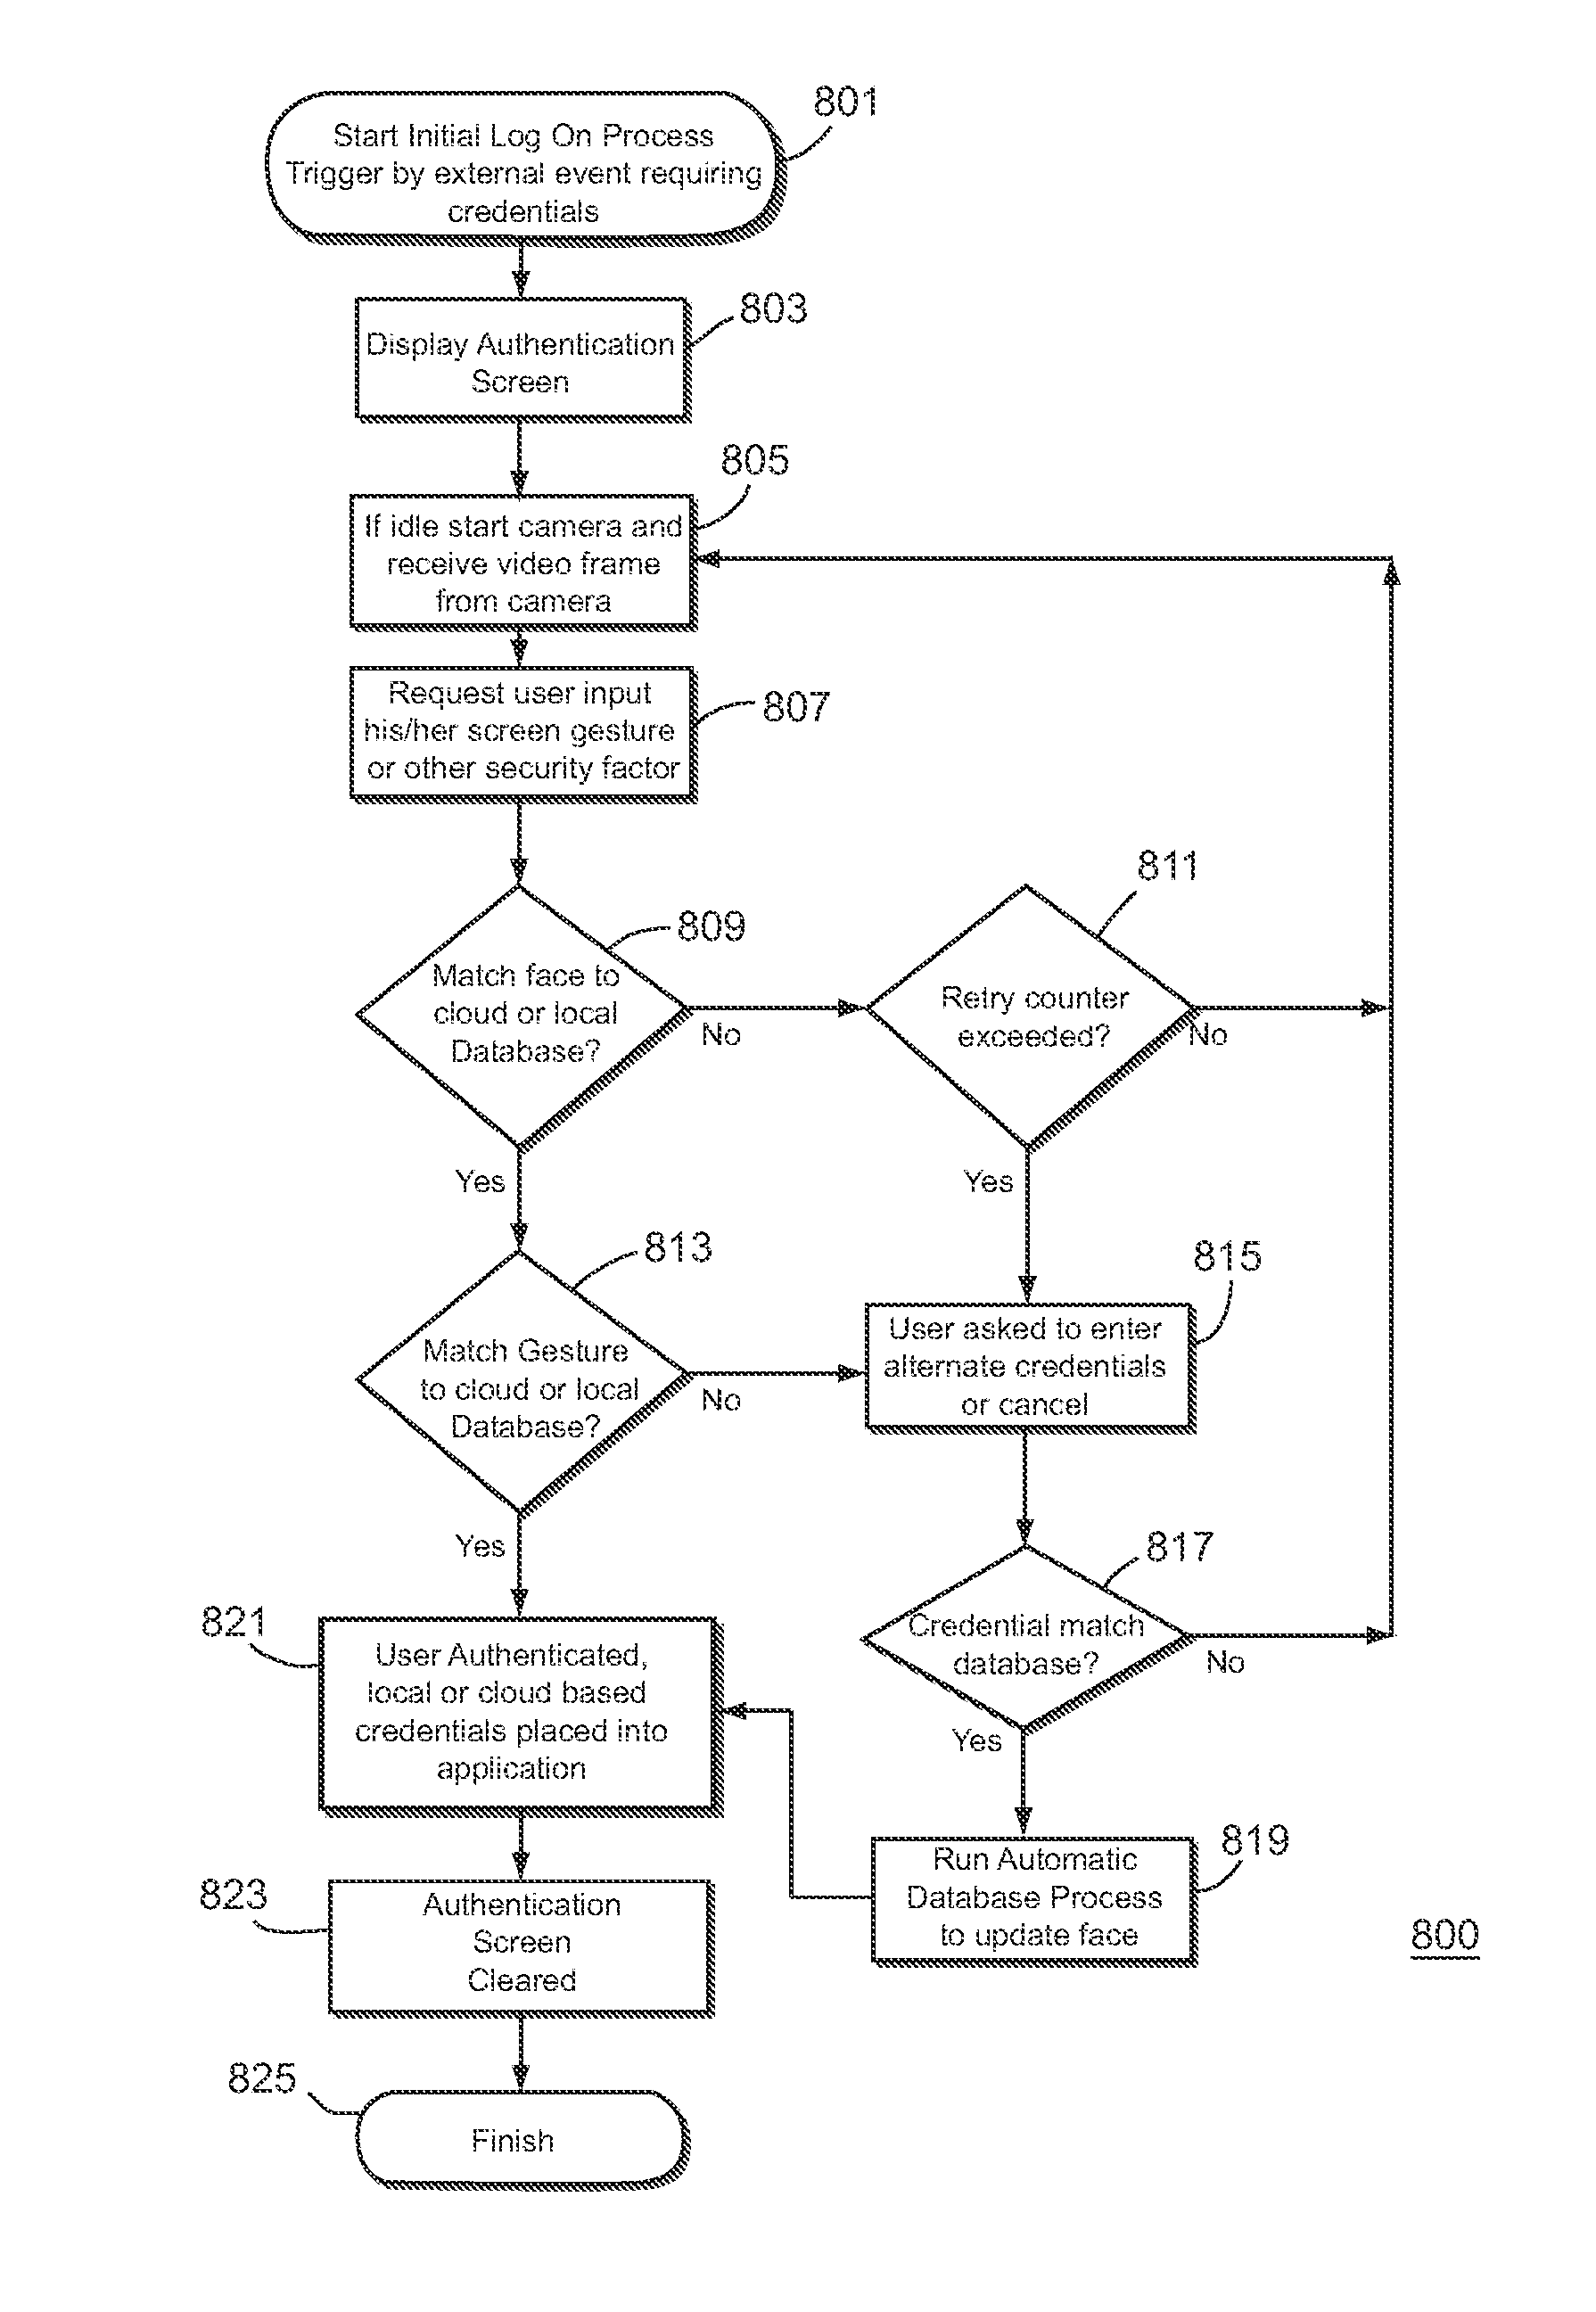 System and method for providing secure access to an electronic device using both a screen gesture and facial biometrics